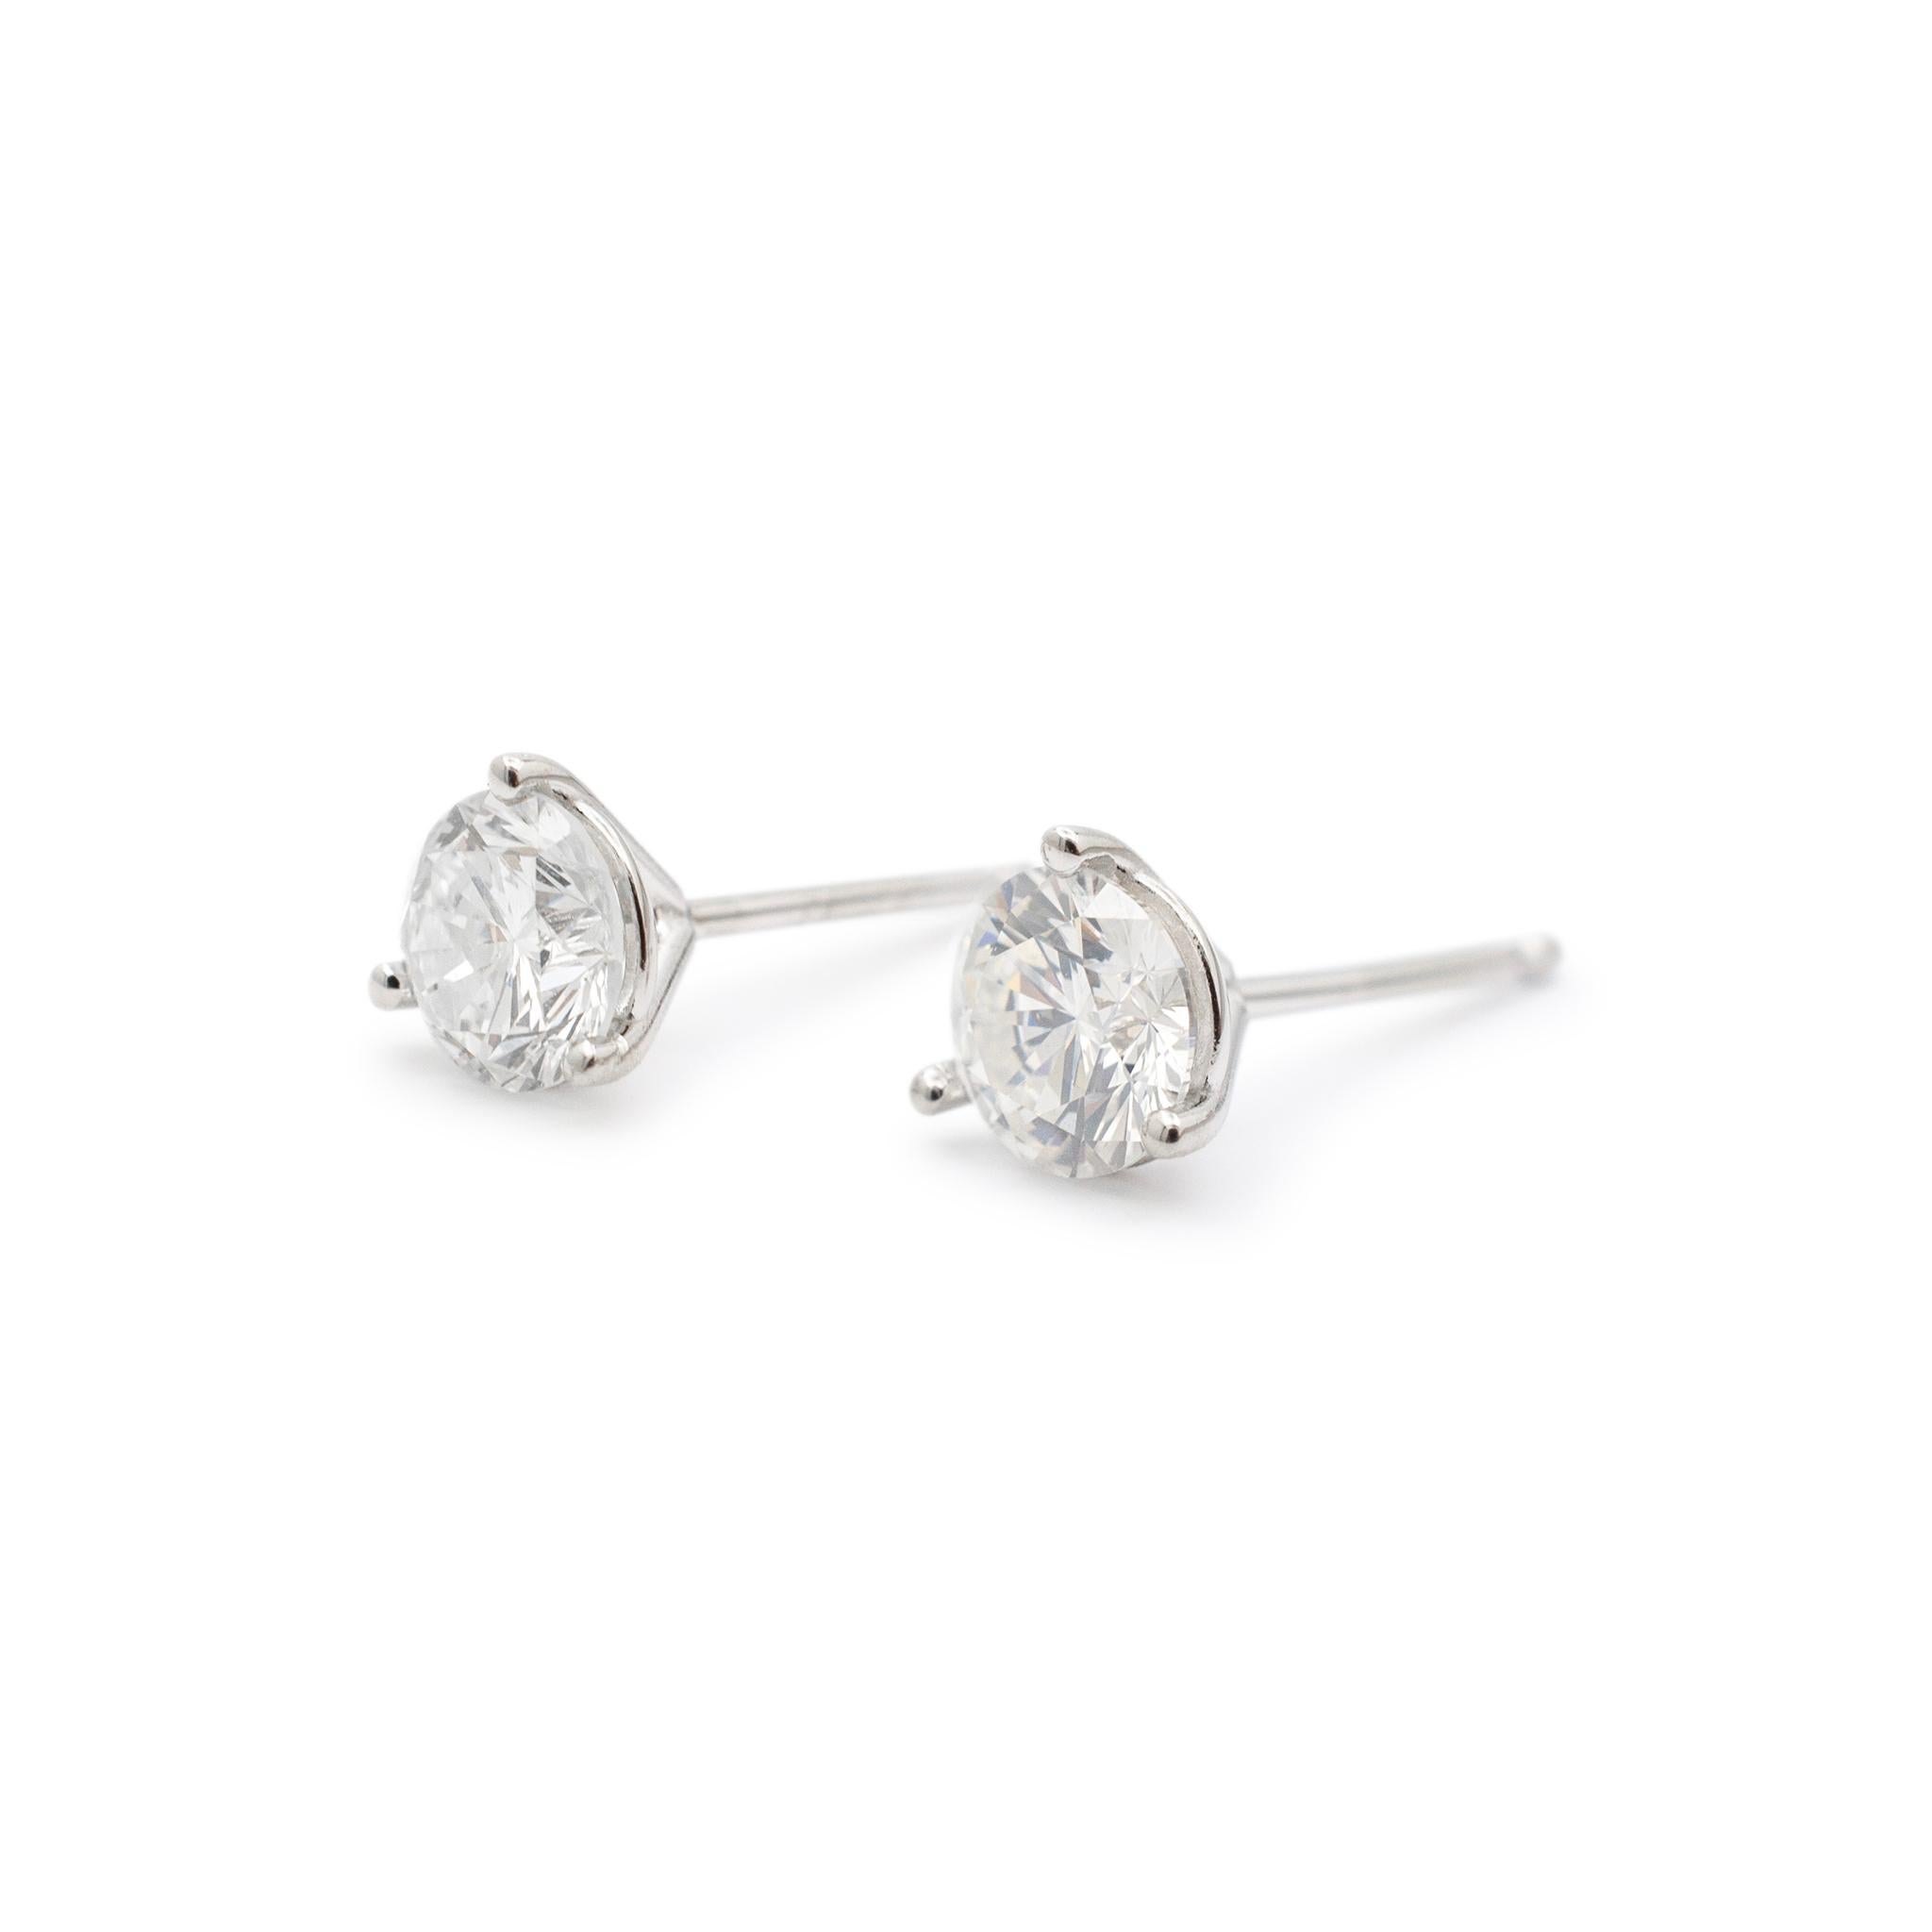 Gender: Ladies

Metal Type: 14K White Gold

Length: 0.50 Inches

Diameter: 4.90 mm

Weight: 0.70 Grams

Ladies 14K white gold diamond stud earrings with push backs. The metal was tested and determined to be 14K white gold. Engraved with